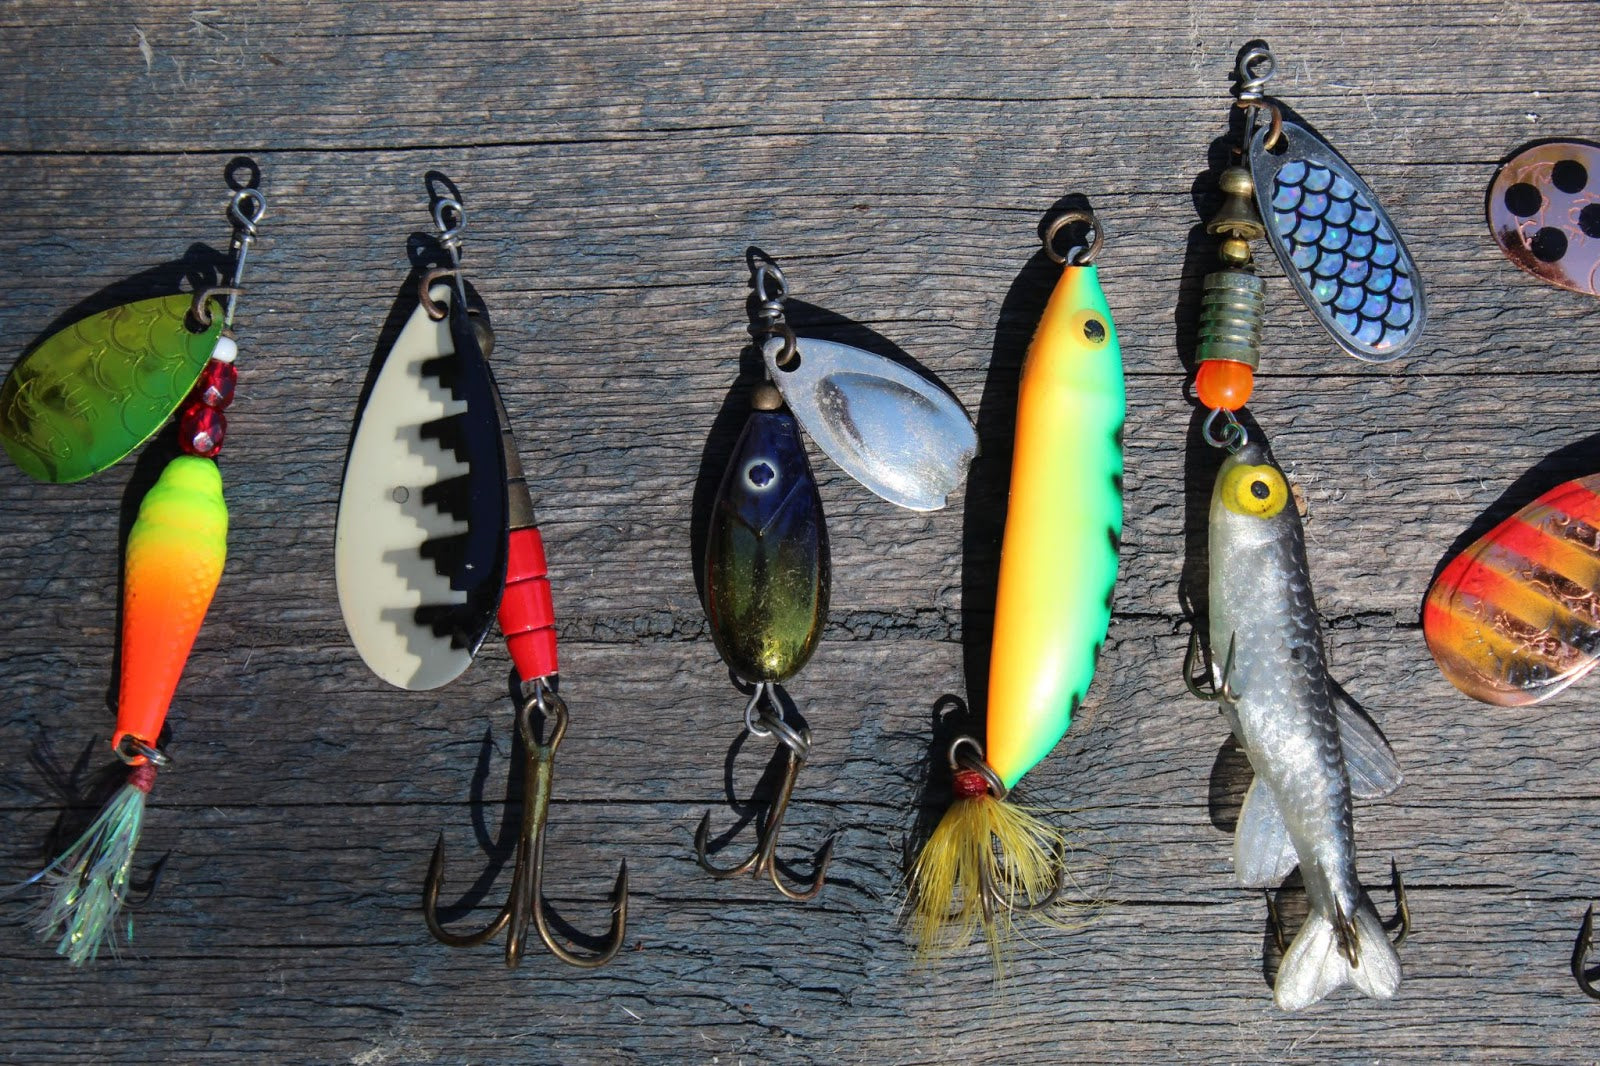 What is your favorite bait / lure and what type of fish do you use